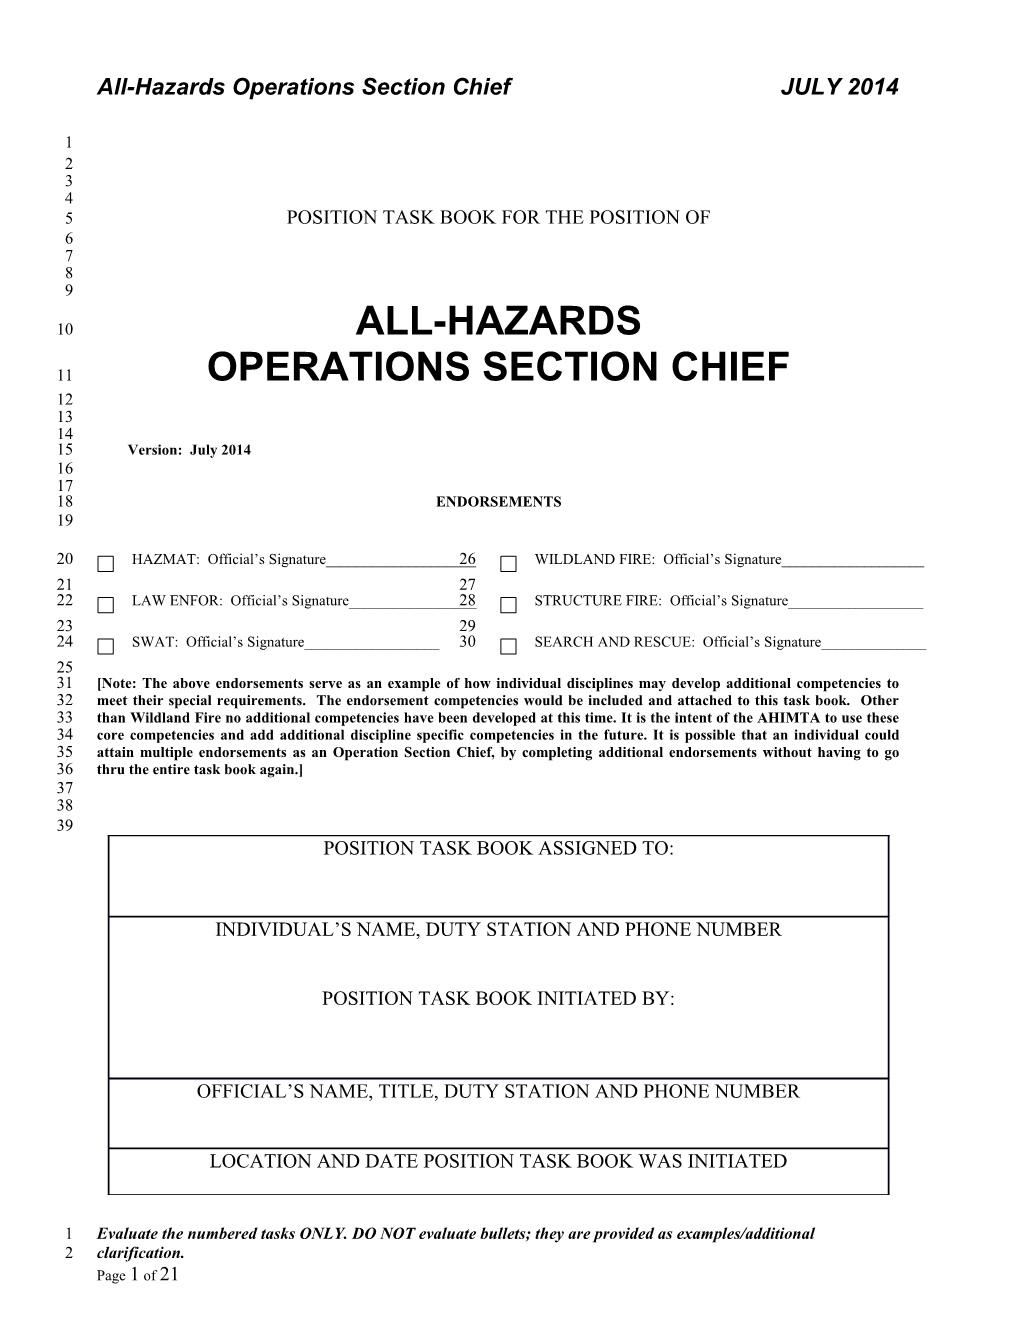 All-Hazards Operations Section Chief